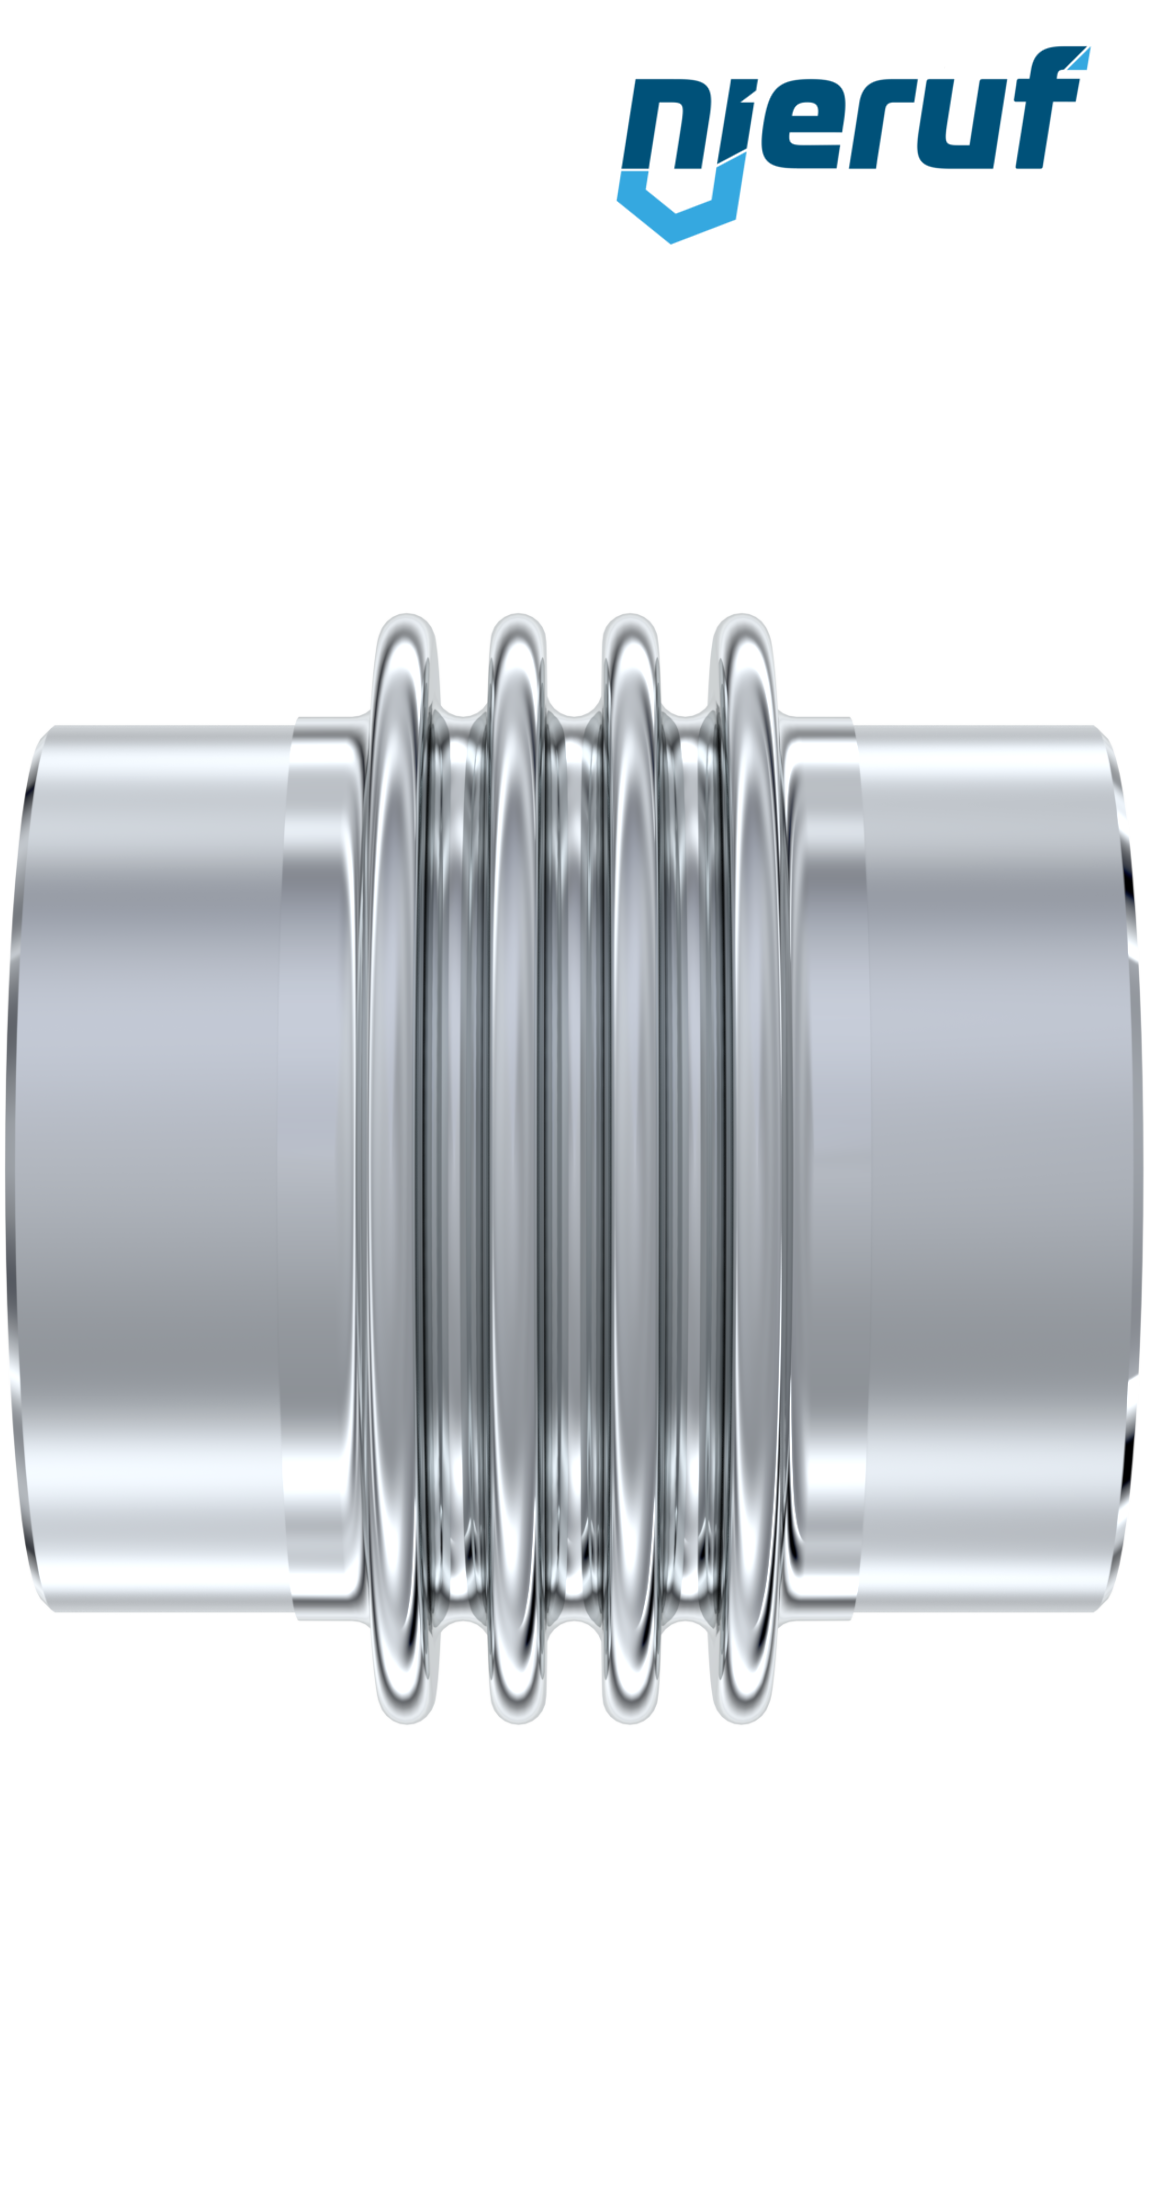 Axial expansion joint DN250 - 273mm type KP05 welding ends and stainless steel-bellows